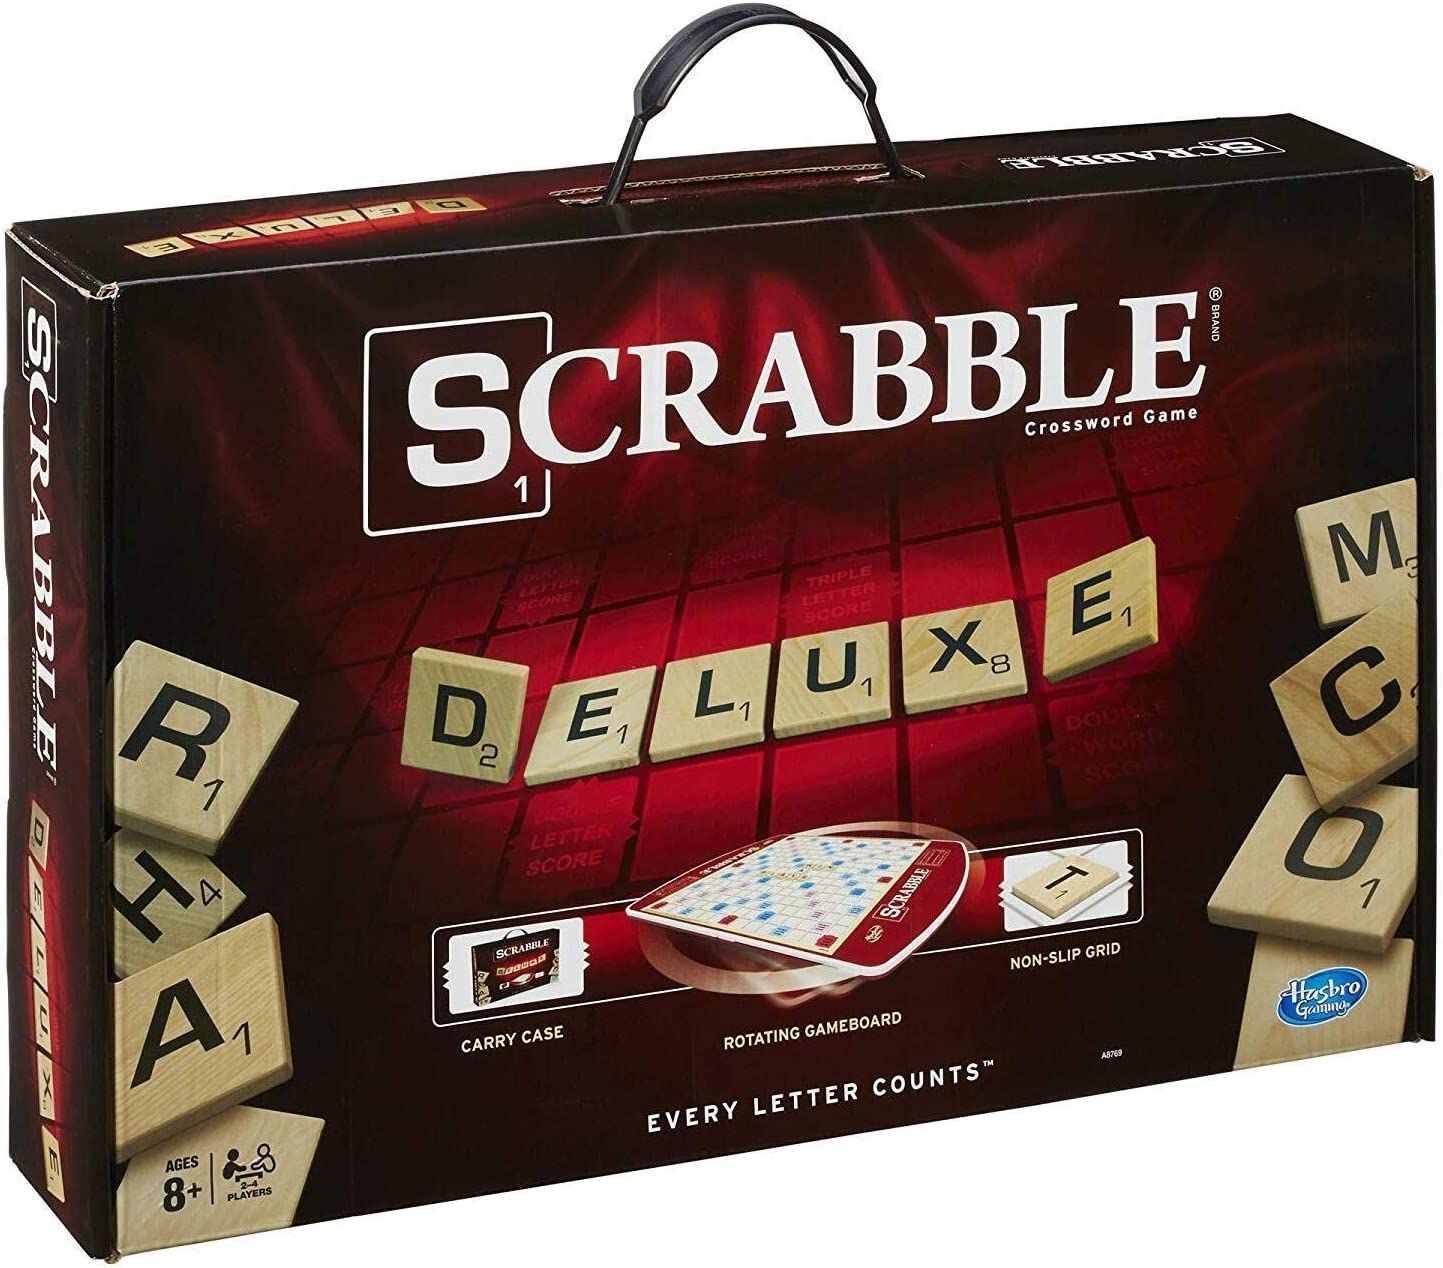 Scrabble is one of the best legacy board games